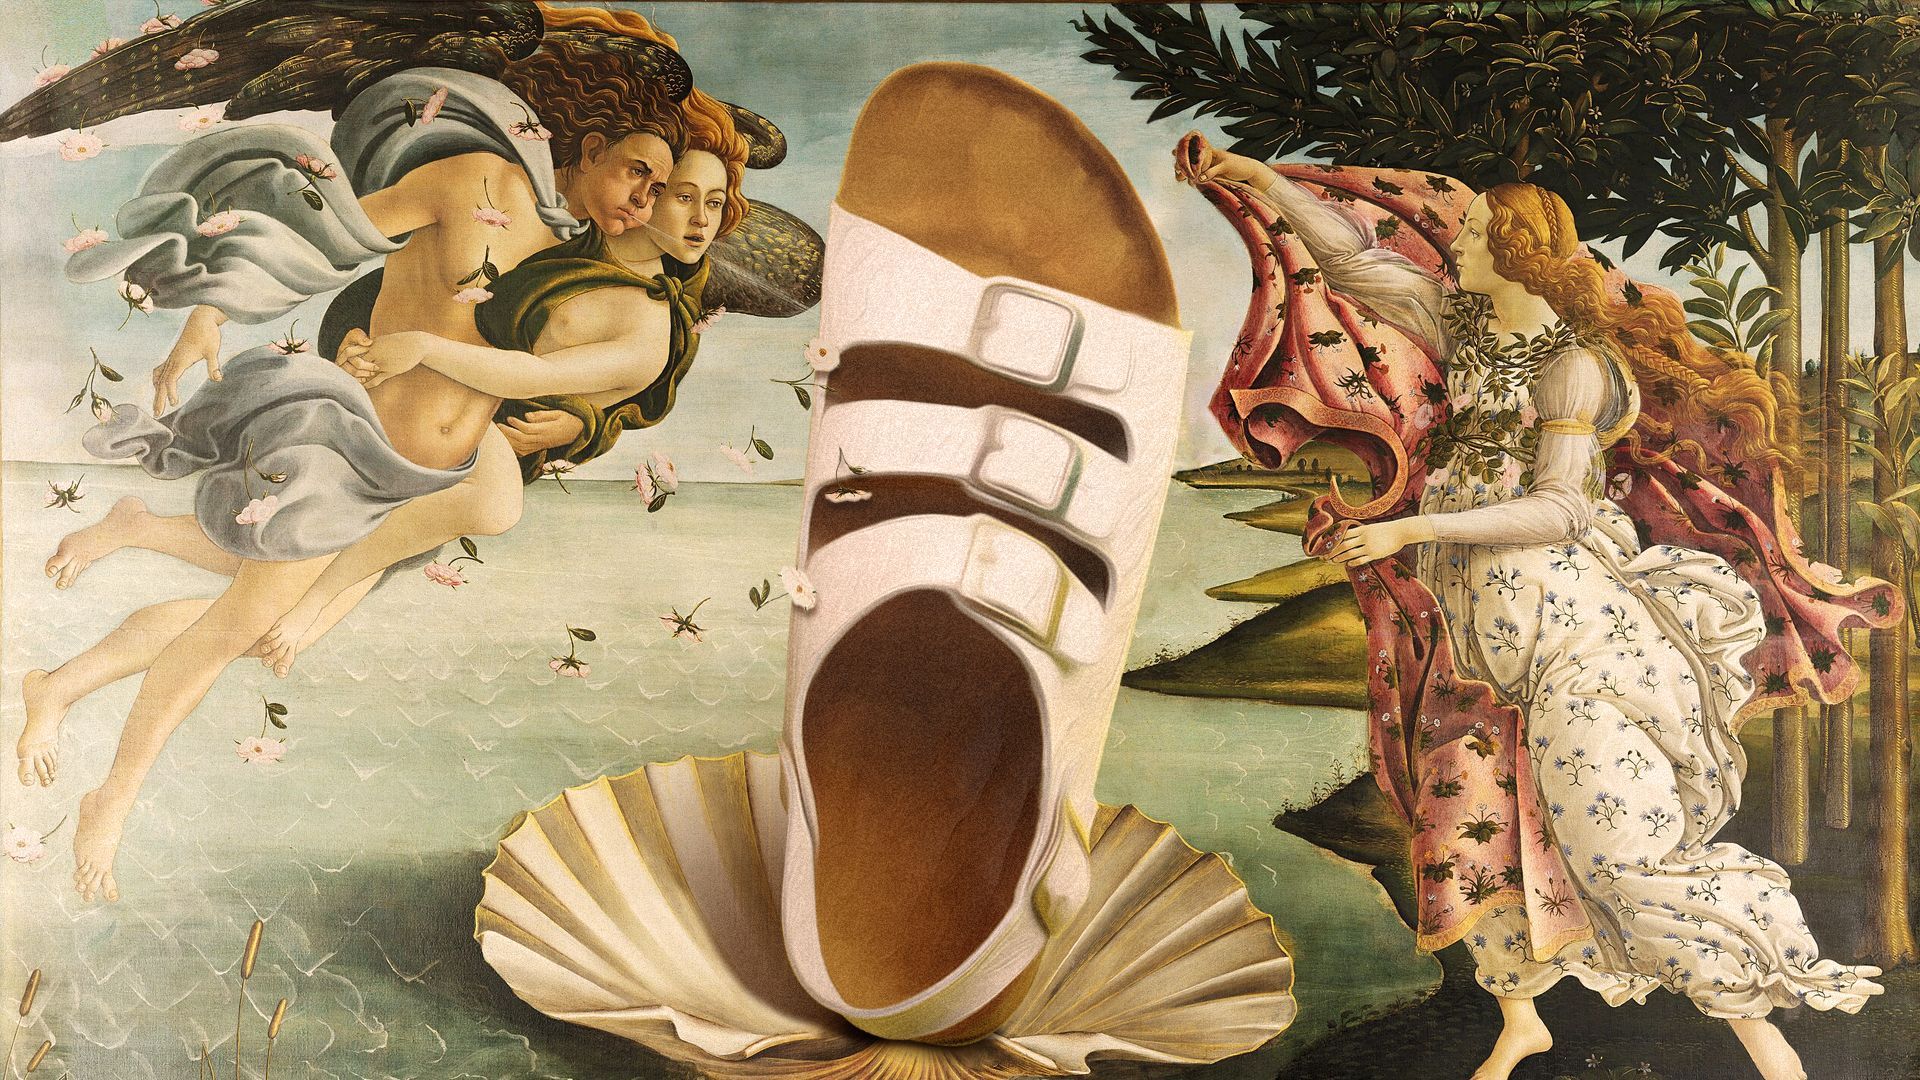 Illustration of the painting The Birth of Venus by Botticelli with a Birkenstock sandal in place of Venus